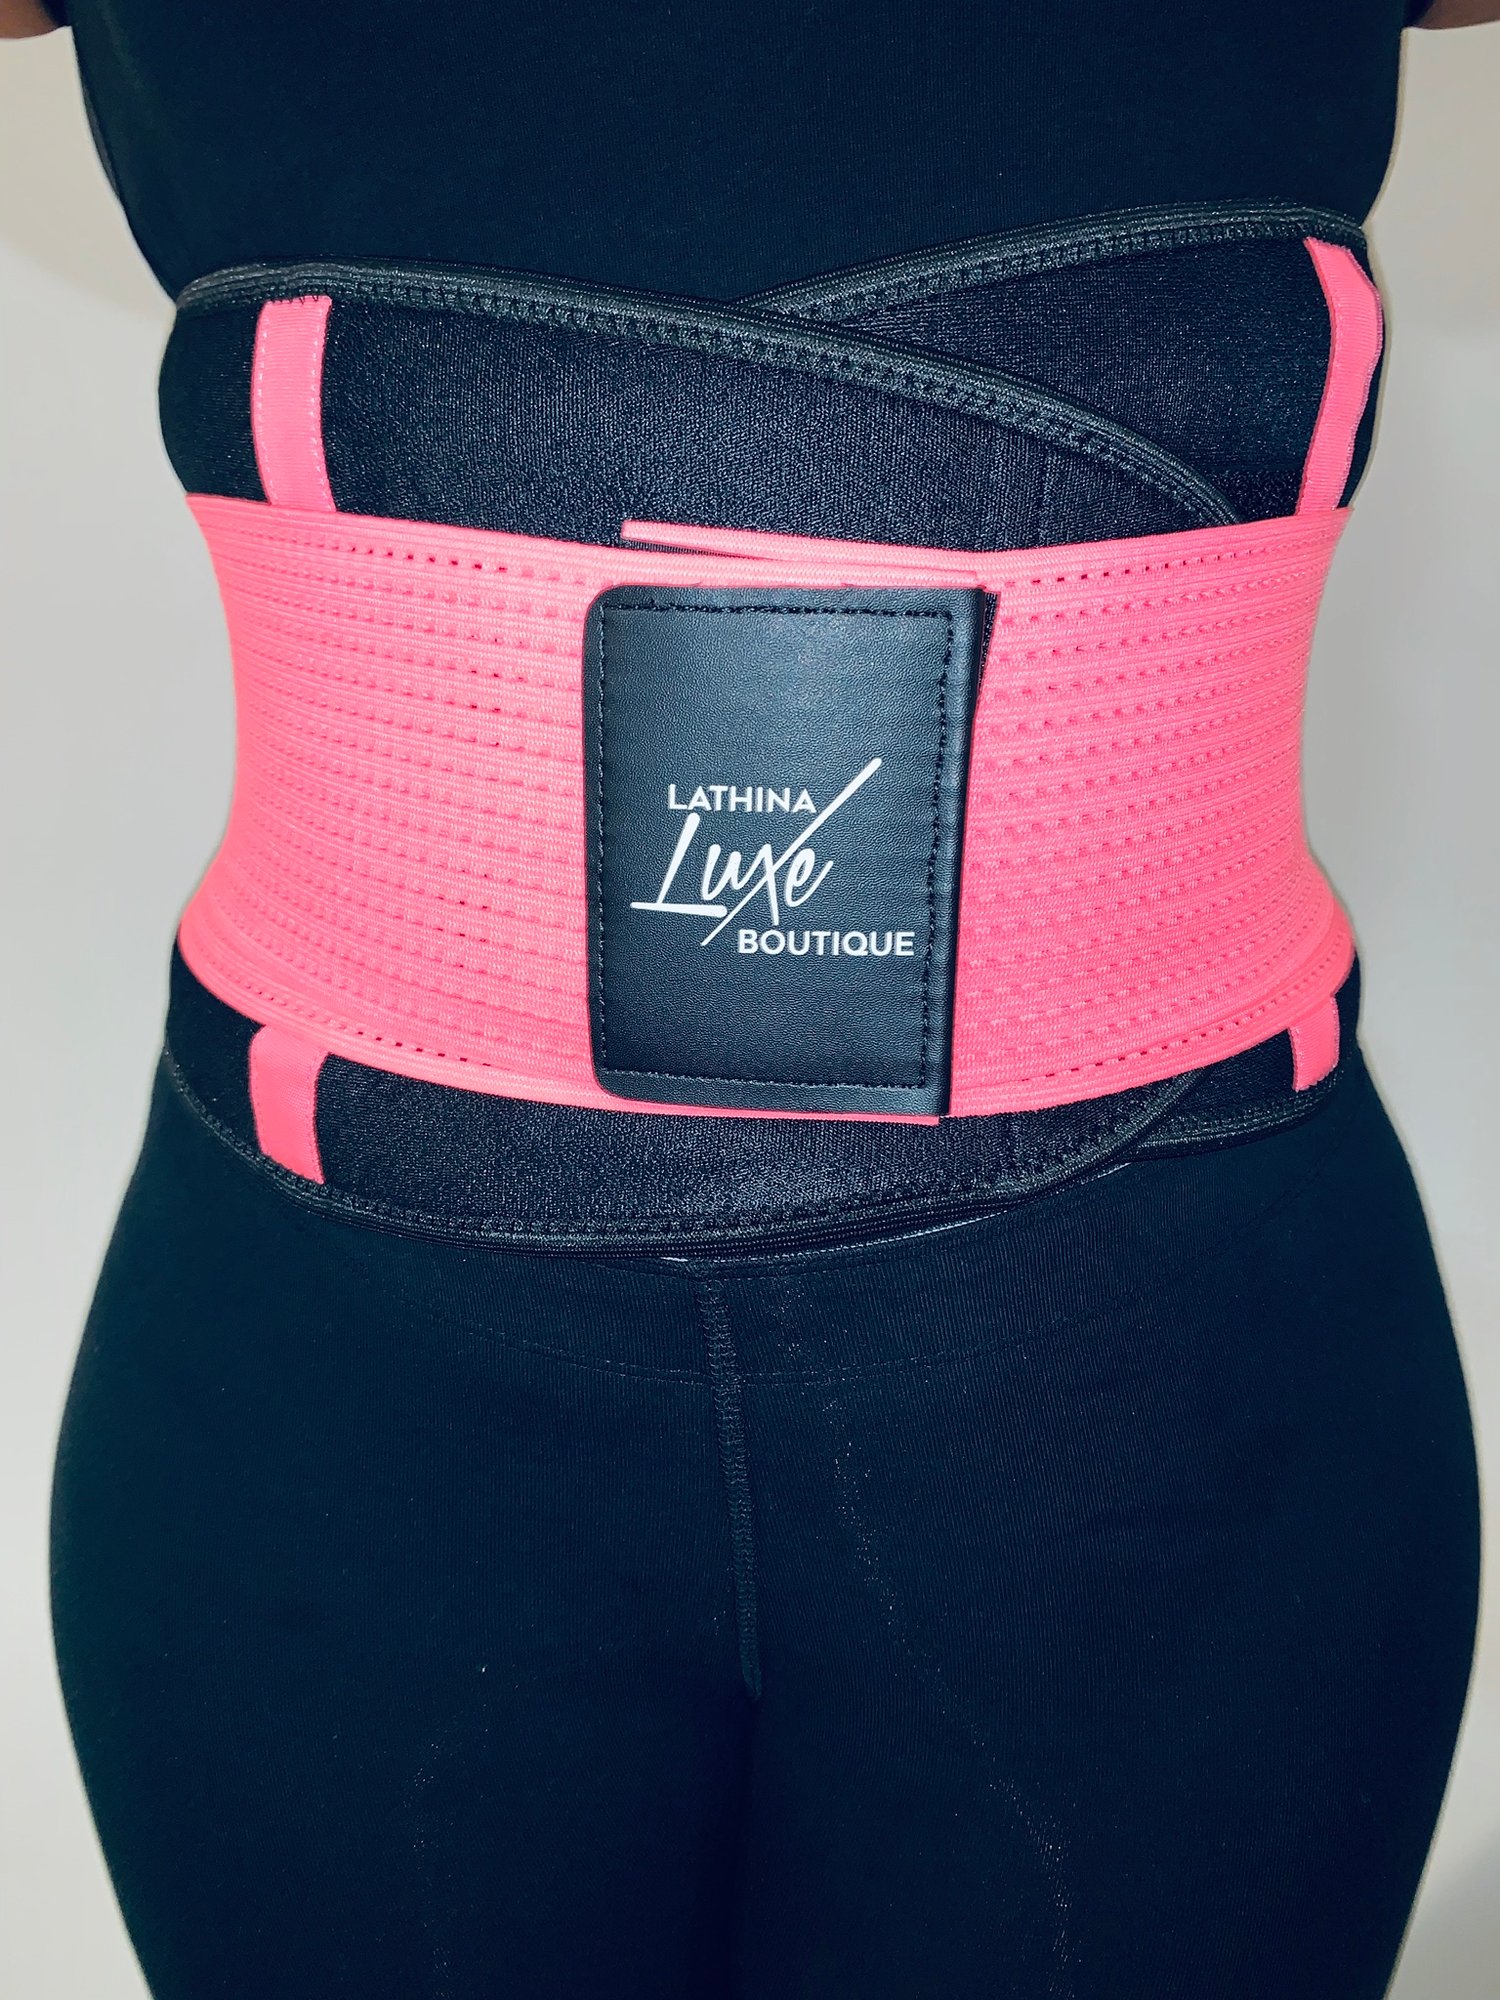 Luxe Sweat Belt  Lathina Luxe Boutique